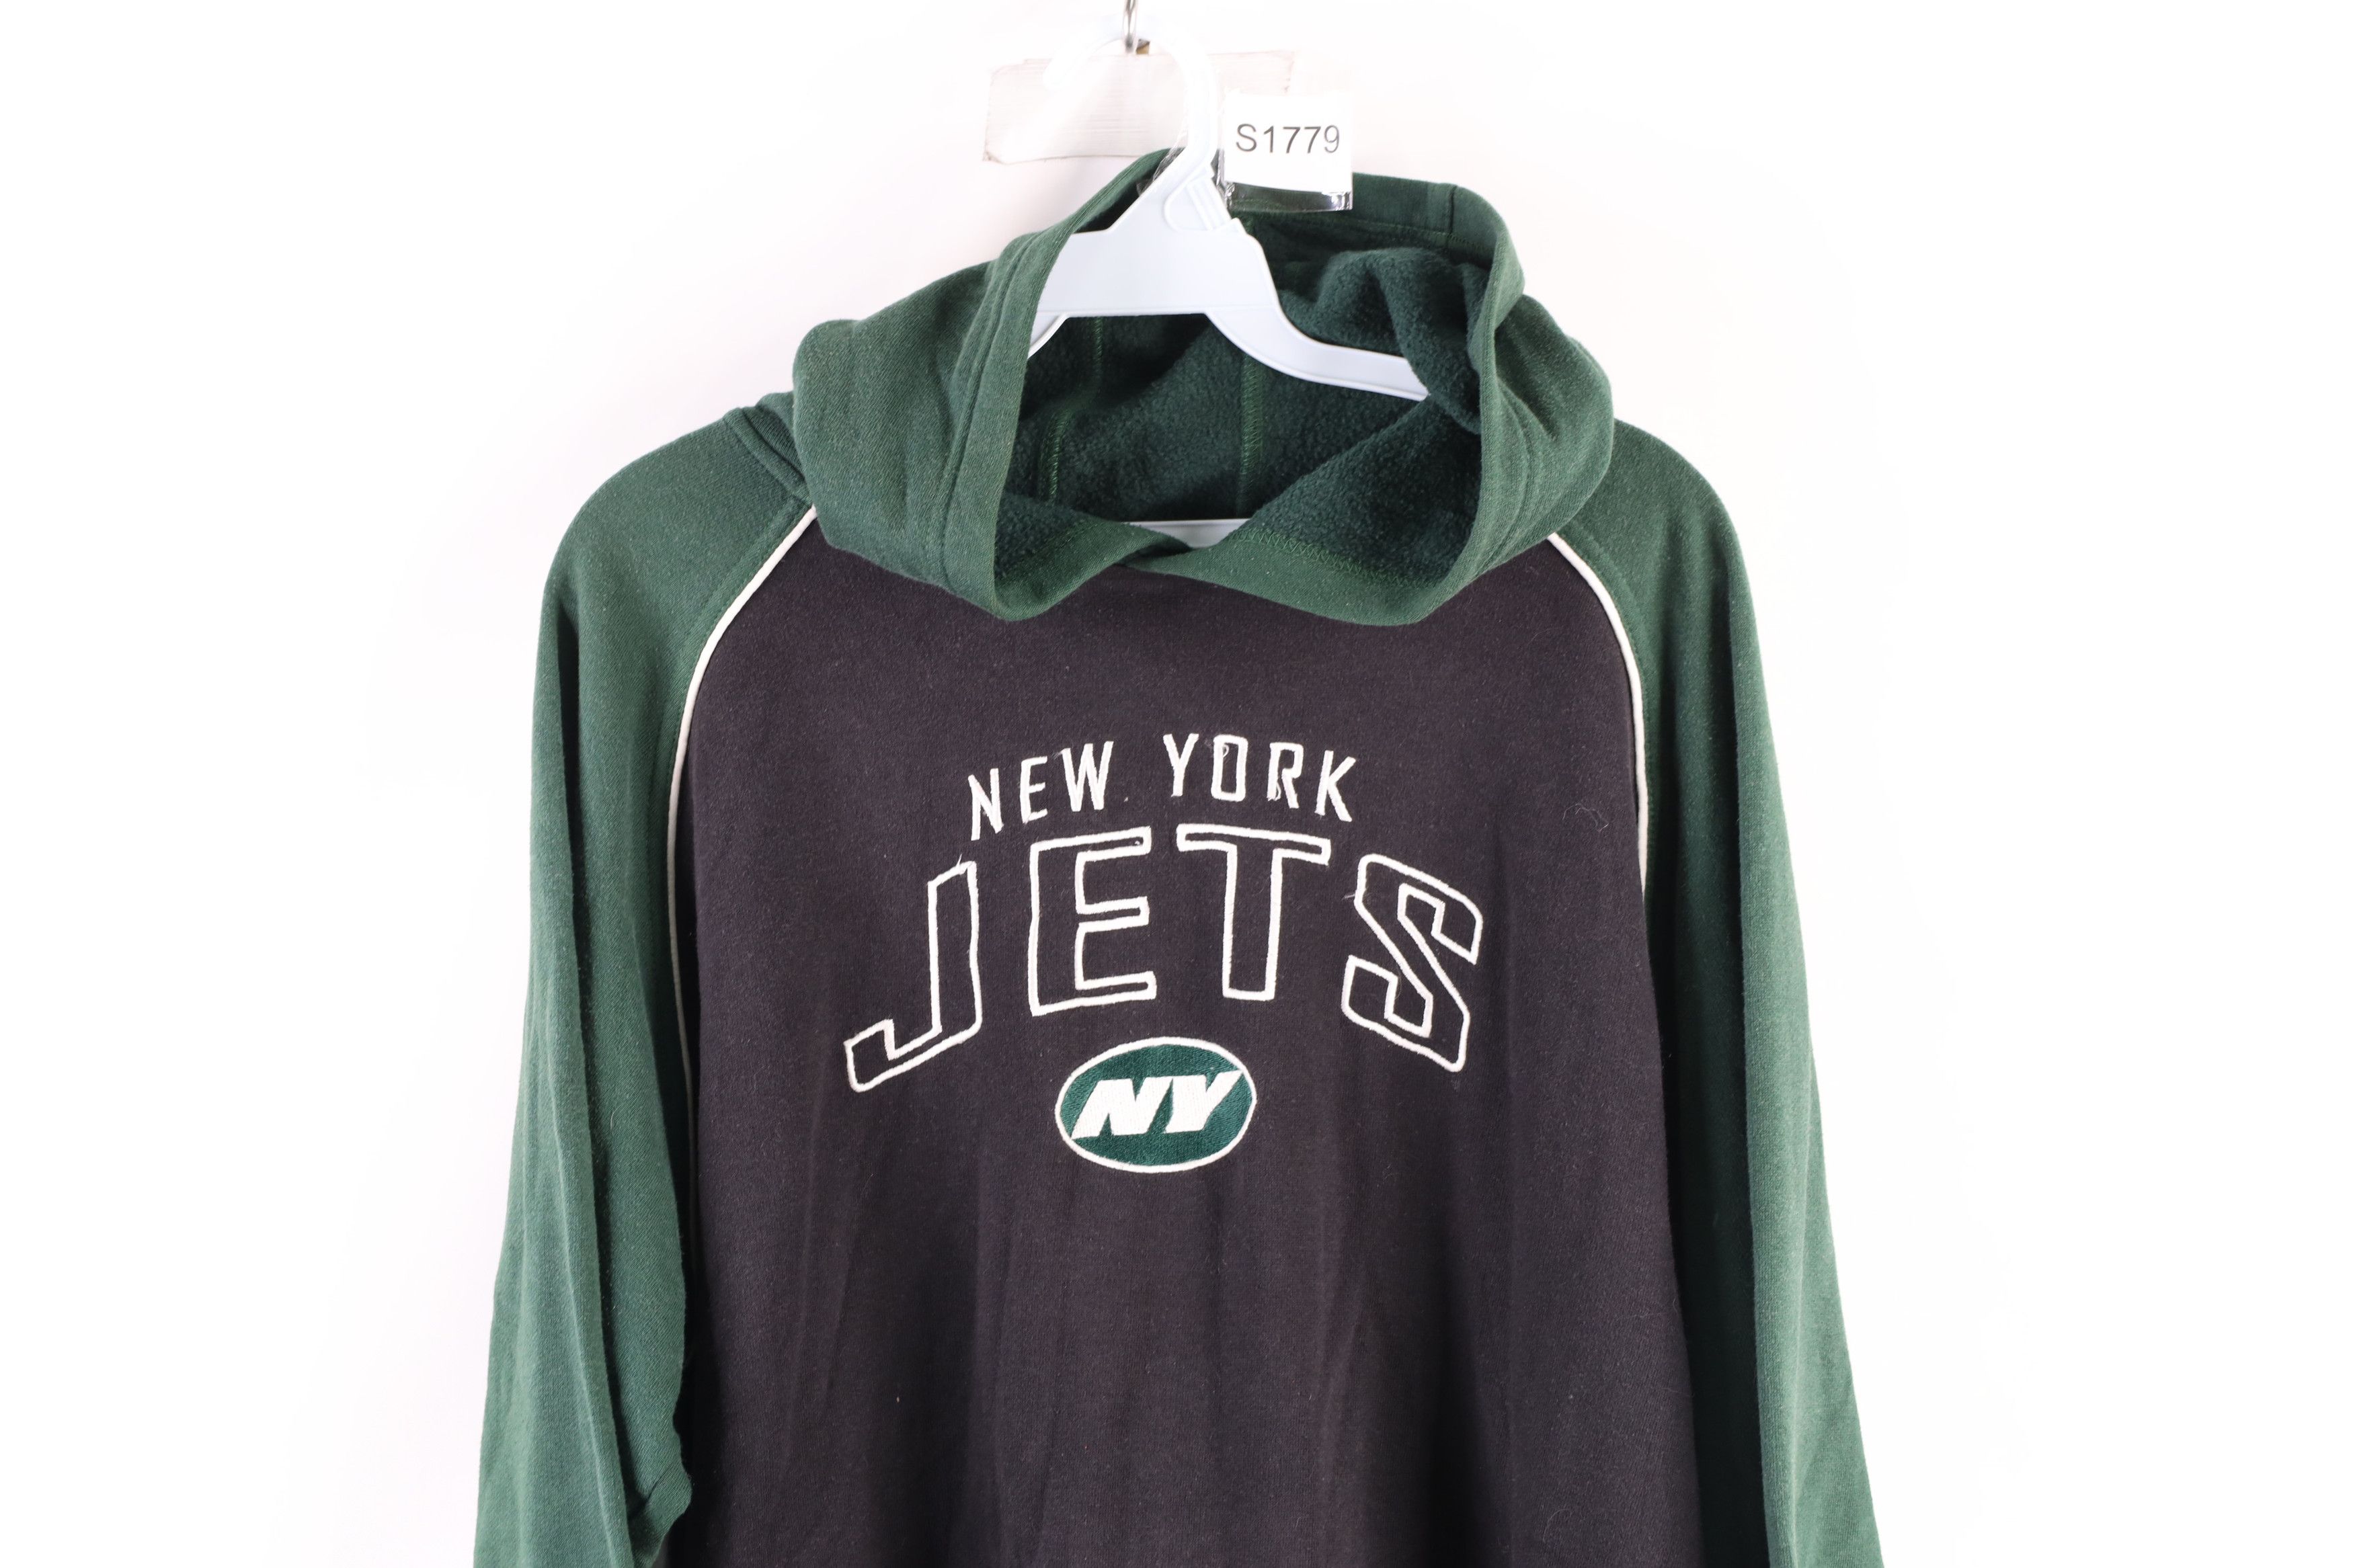 Vintage Vintage Reebok Spell Out New York Jets Football Hoodie Black Size M / US 6-8 / IT 42-44 - 2 Preview